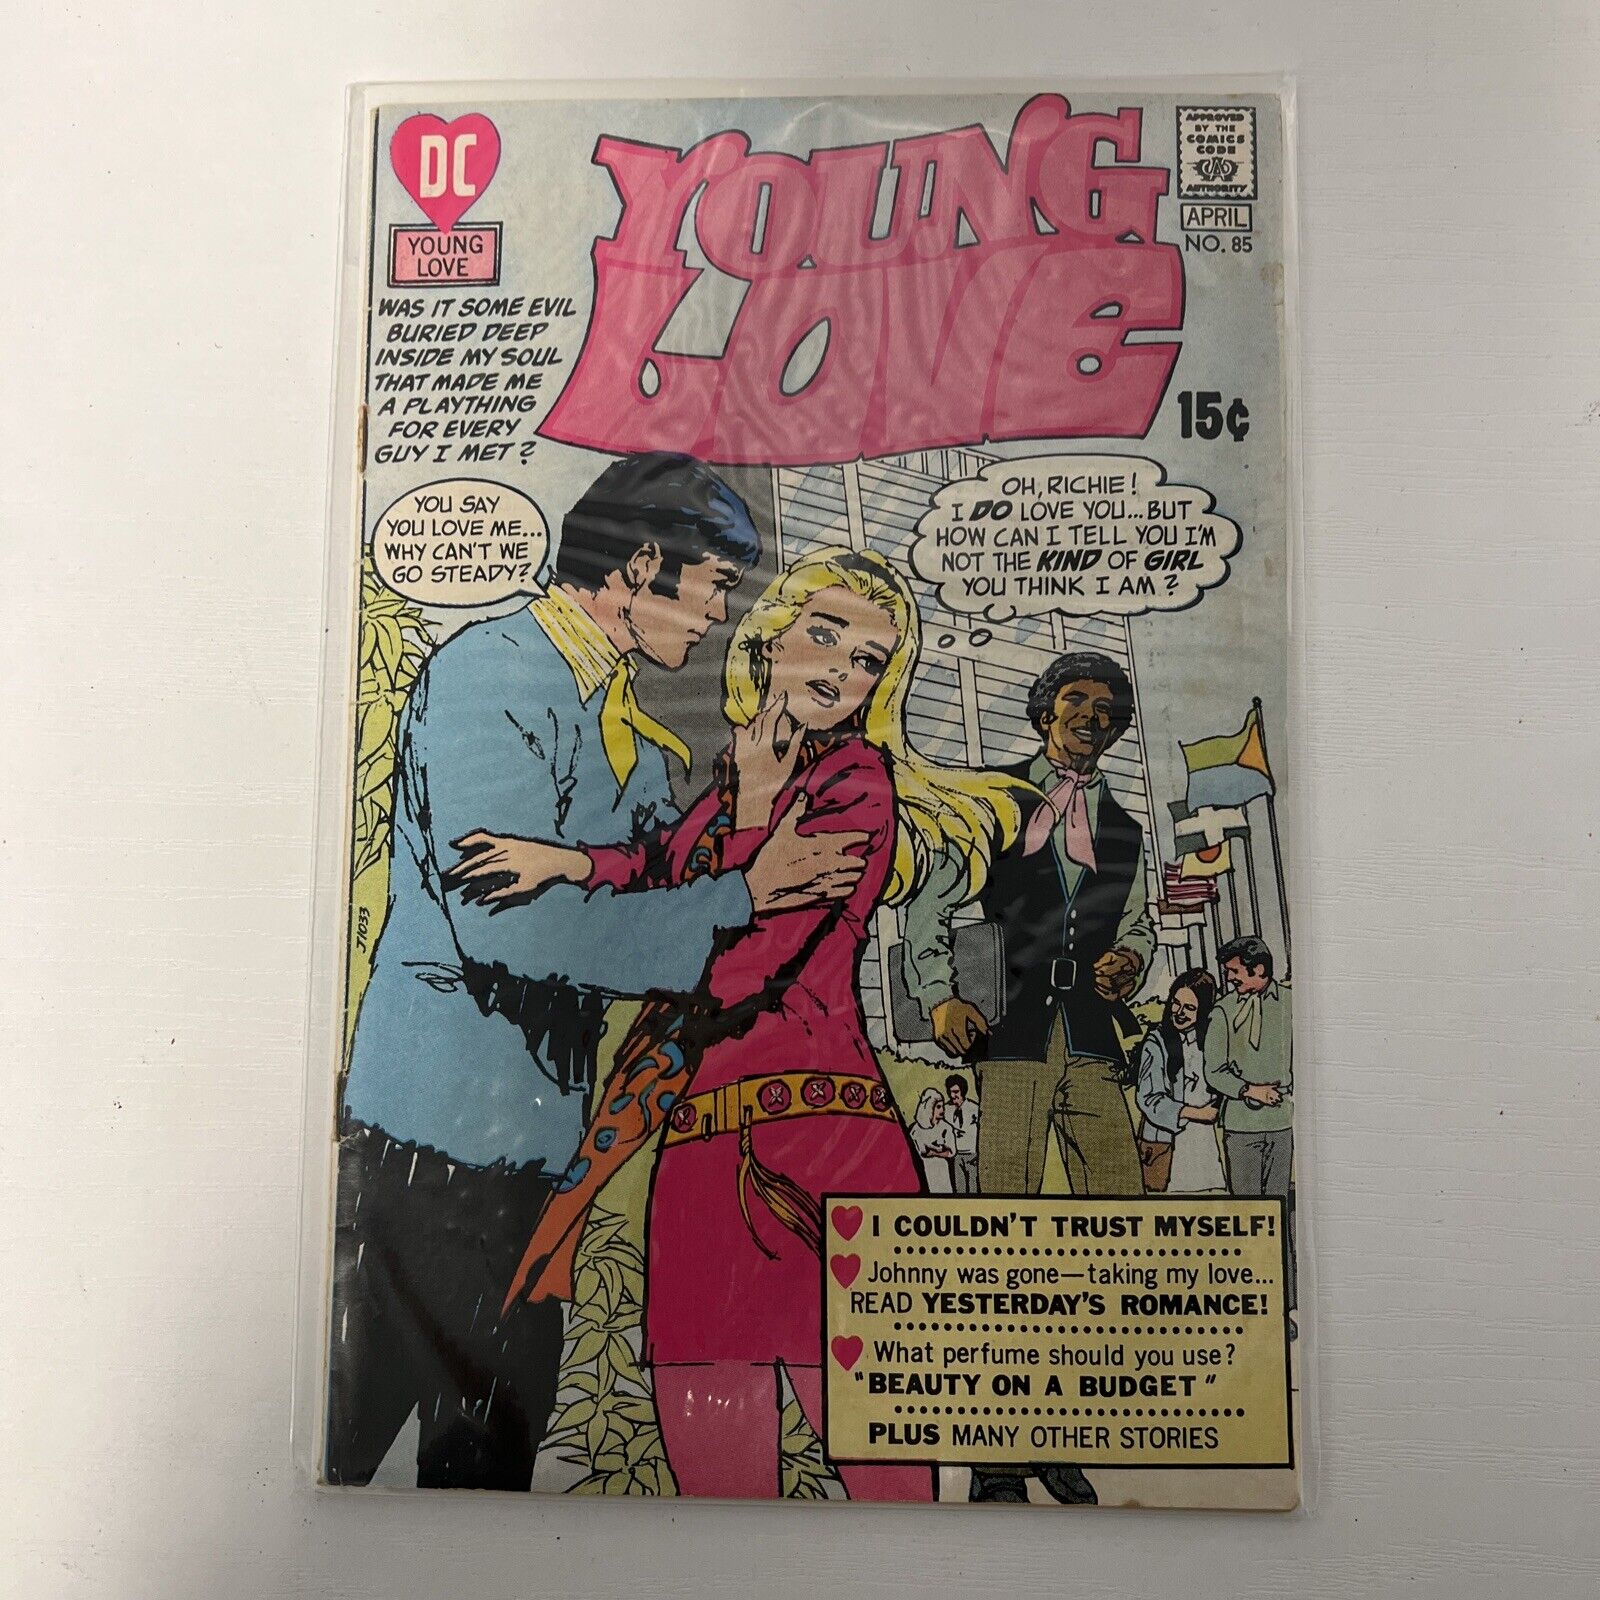 1971 DC - Young Love # 85 - Very Good Condition